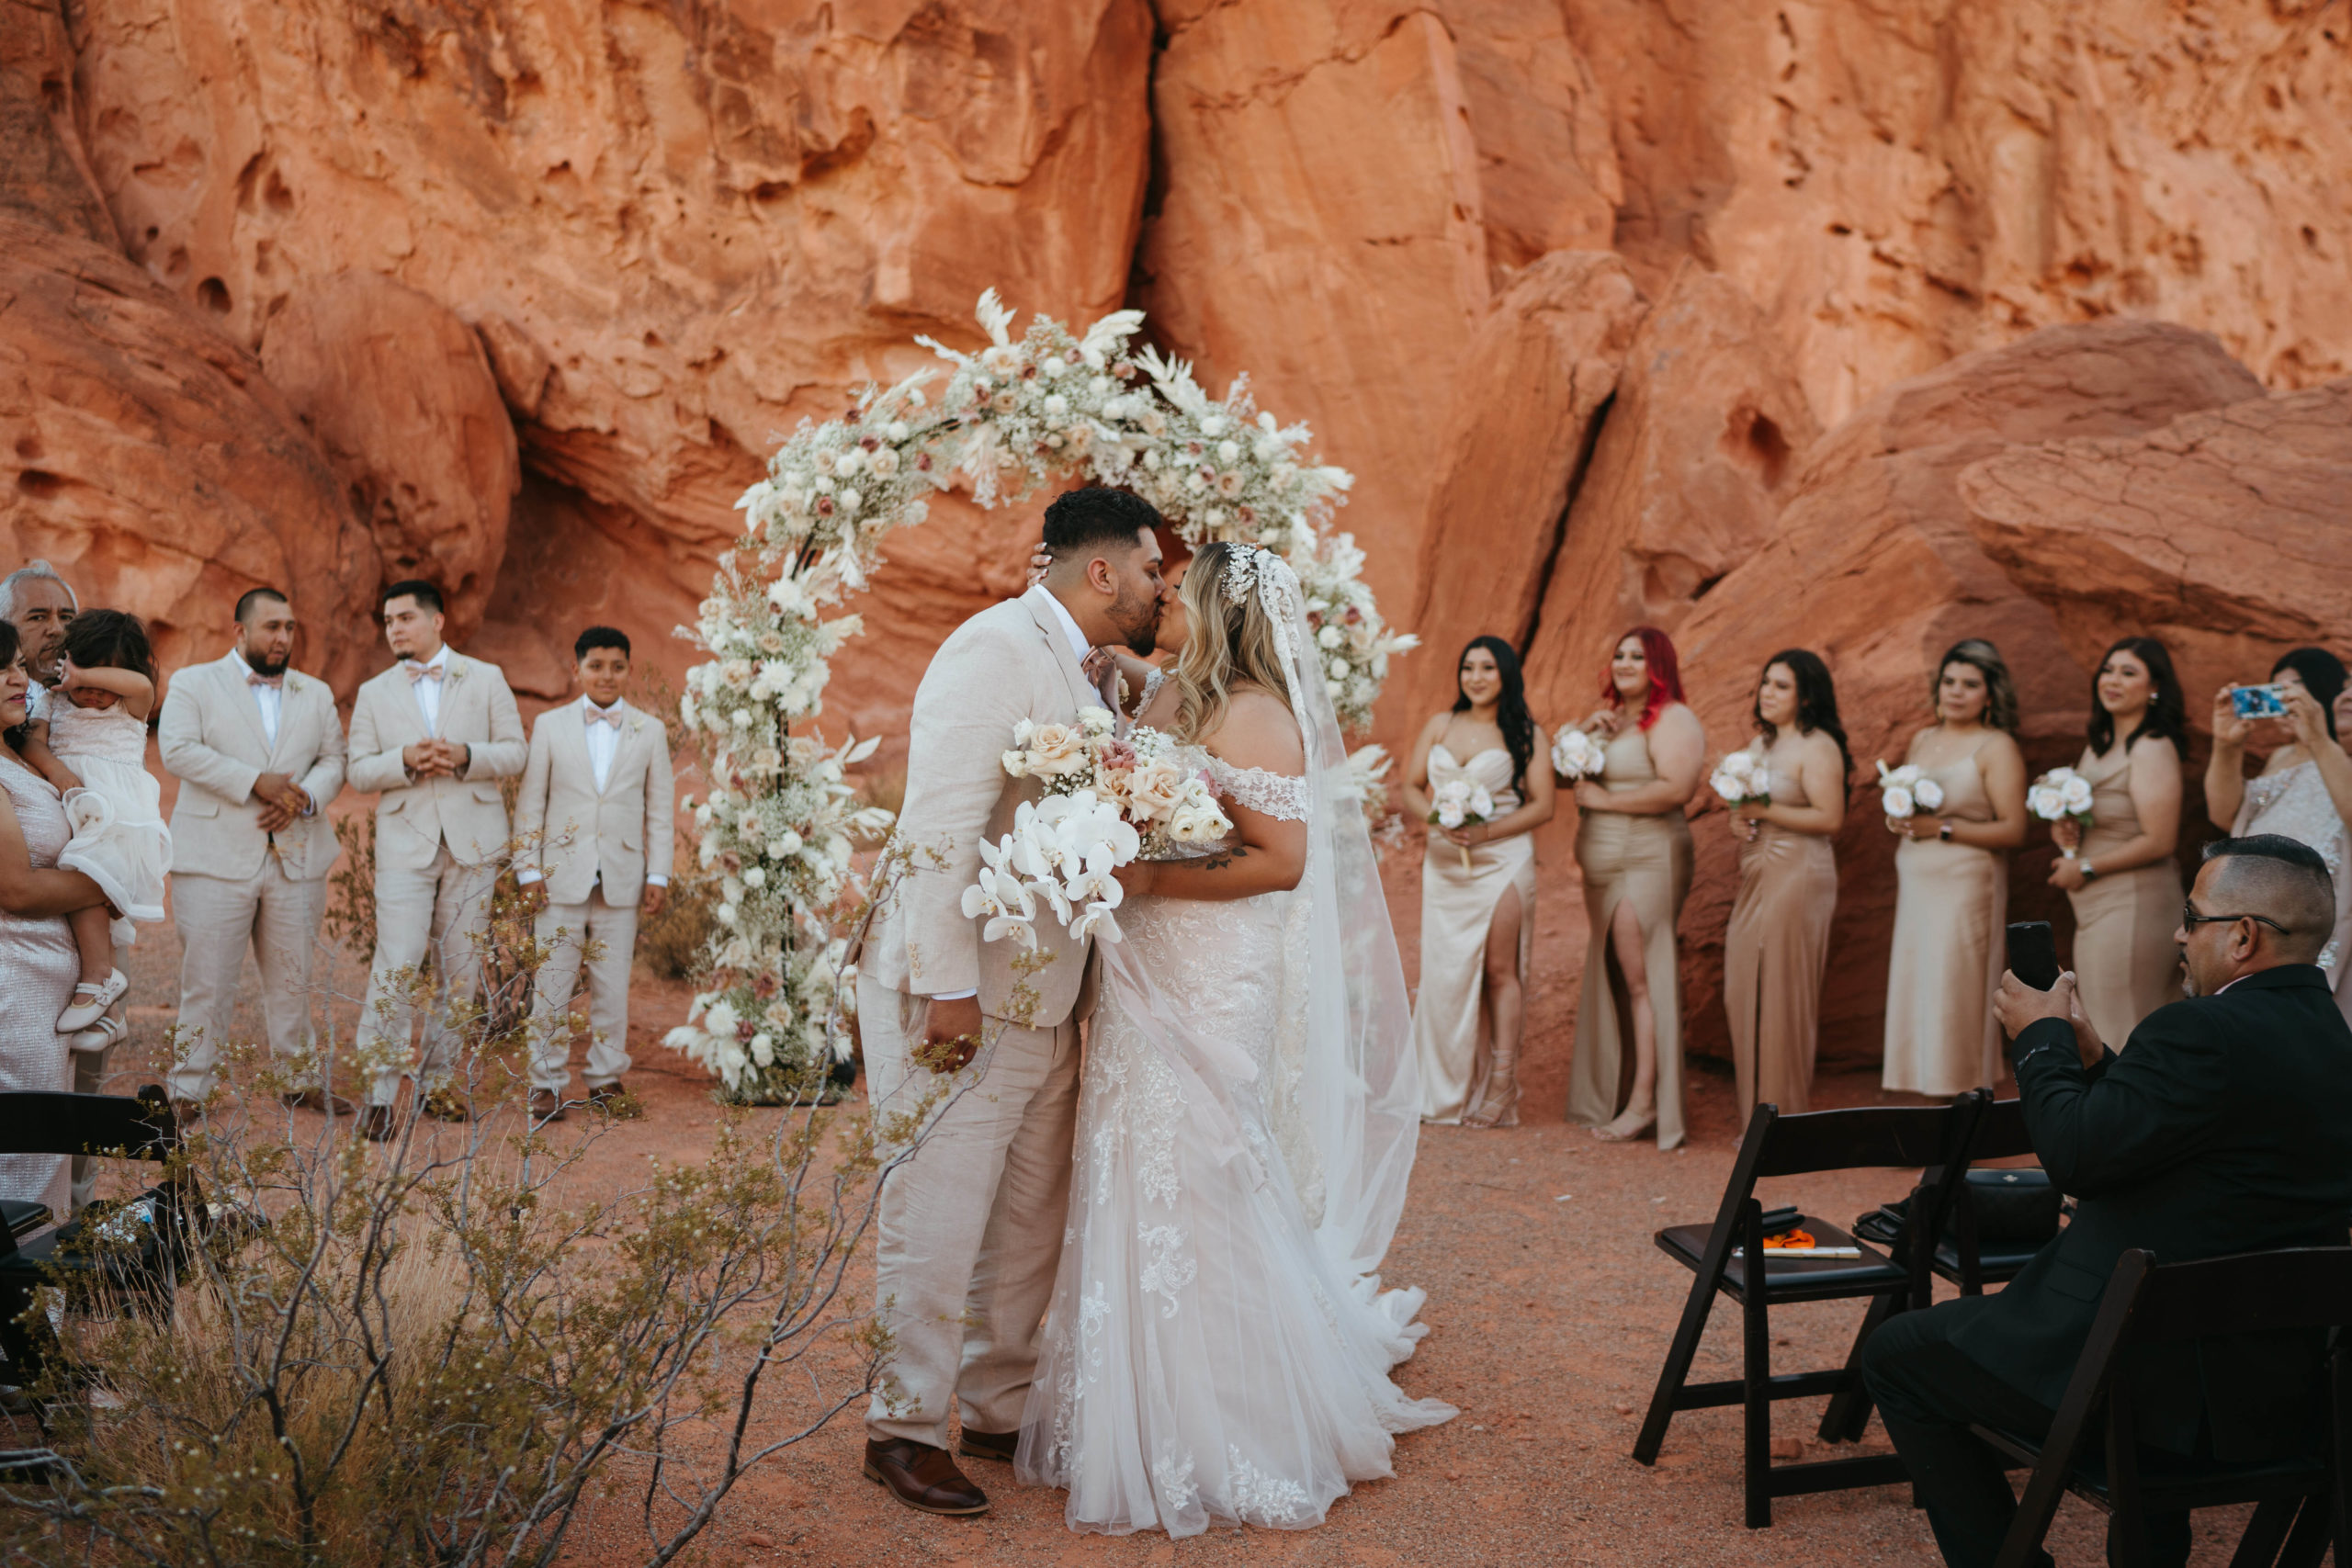 Modern Monochromatic Desert Micro-Wedding. Bride and groom stop in the middle of the aisle to kiss